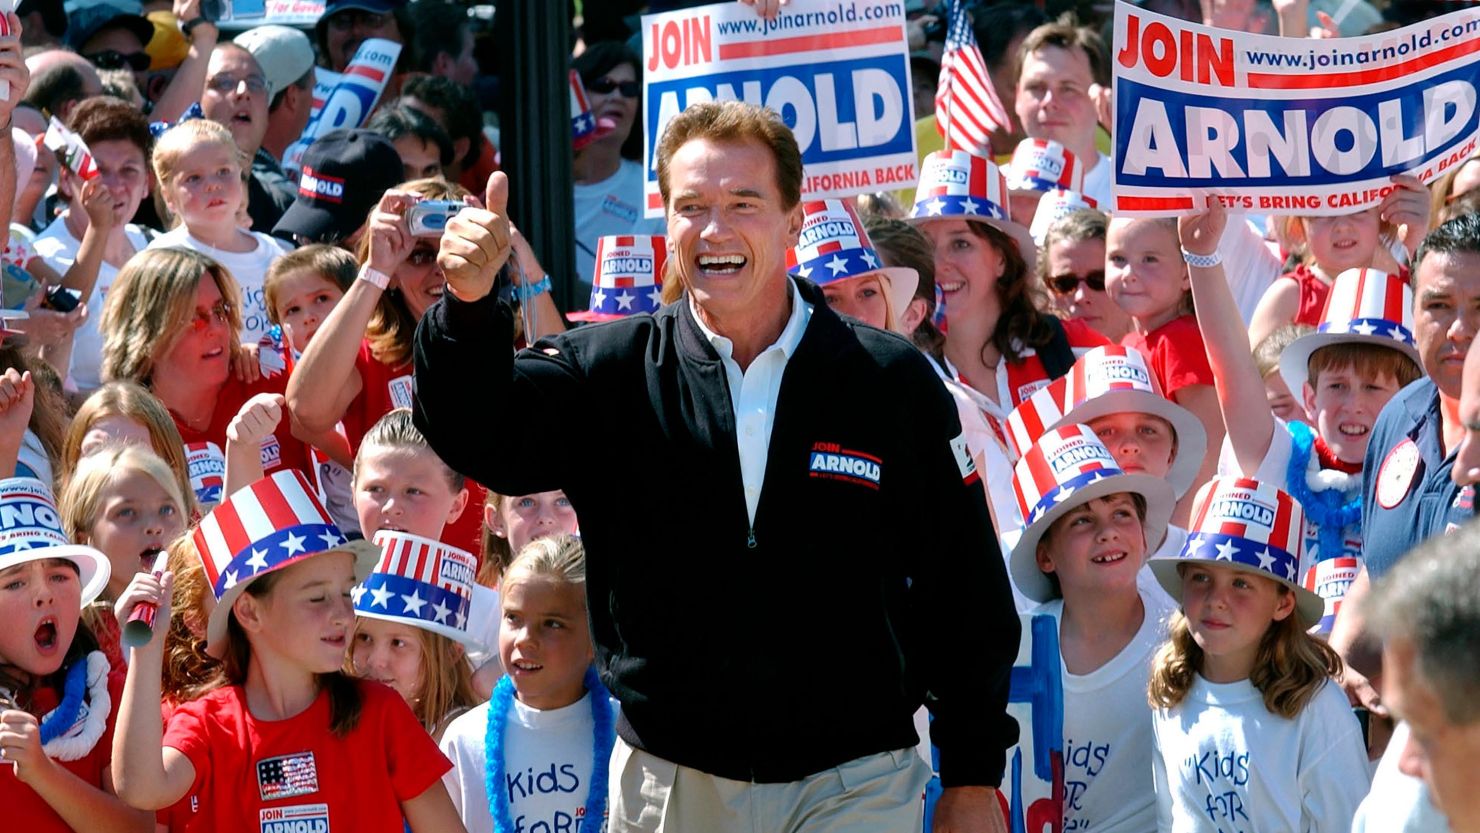 In this October 2003 photo, then-Republican candidate for California governor Arnold Schwarzenegger walks up the steps to the state Capitol surrounded by children and waving to supporters during a campaign rally in Sacramento.